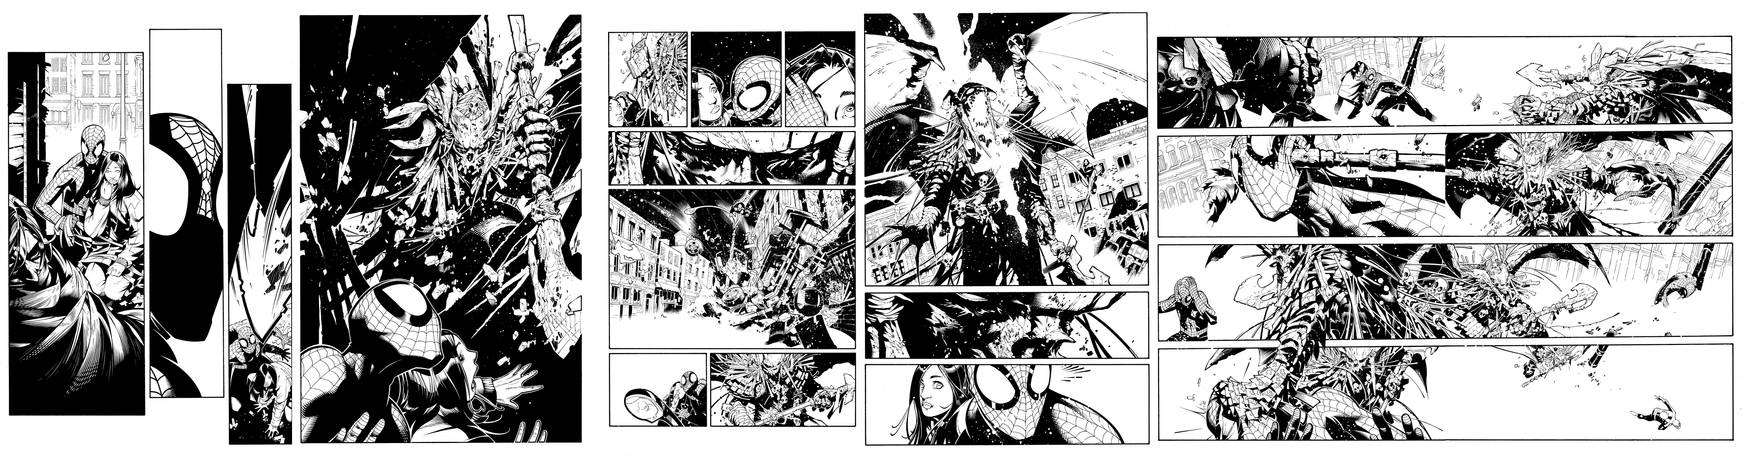 Amazing Spider-Man 557 pages